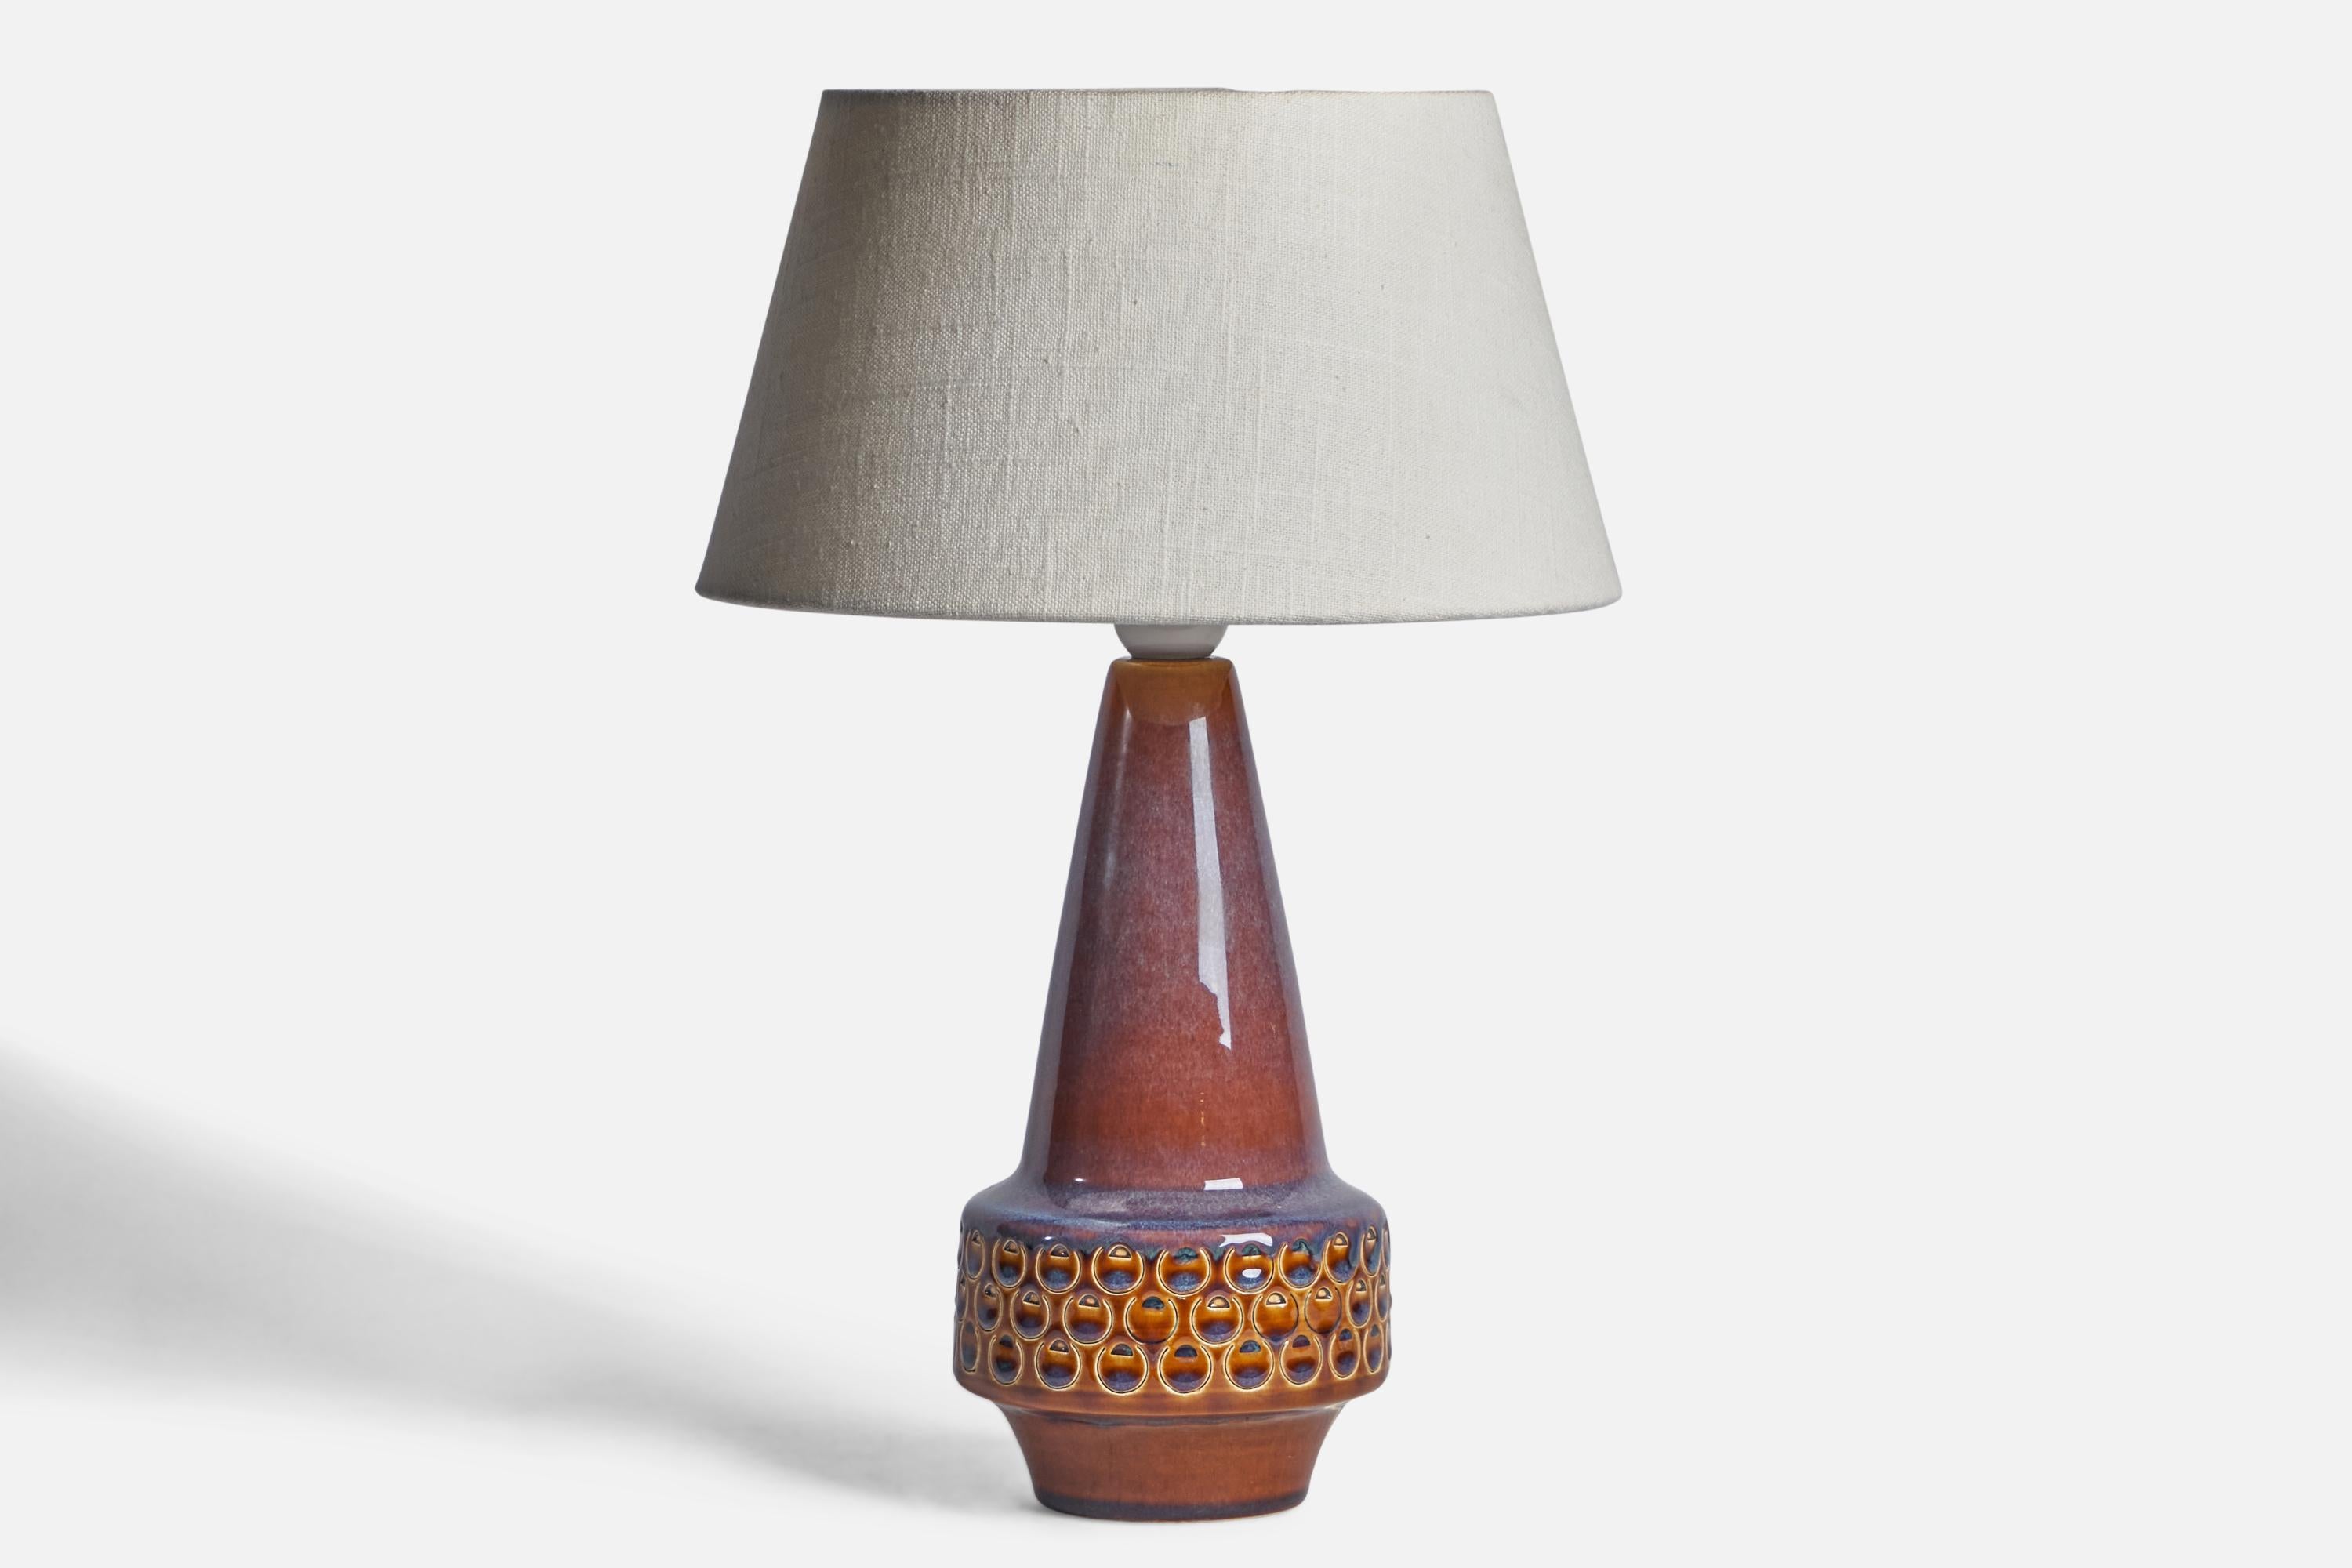 A blue red and beige-glazed stoneware table lamp designed and produced by Søholm, Denmark, 1960s.

Dimensions of Lamp (inches): 12.25” H x 4.75” Diameter
Dimensions of Shade (inches): 7” Top Diameter x 10” Bottom Diameter x 5.5” H 
Dimensions of